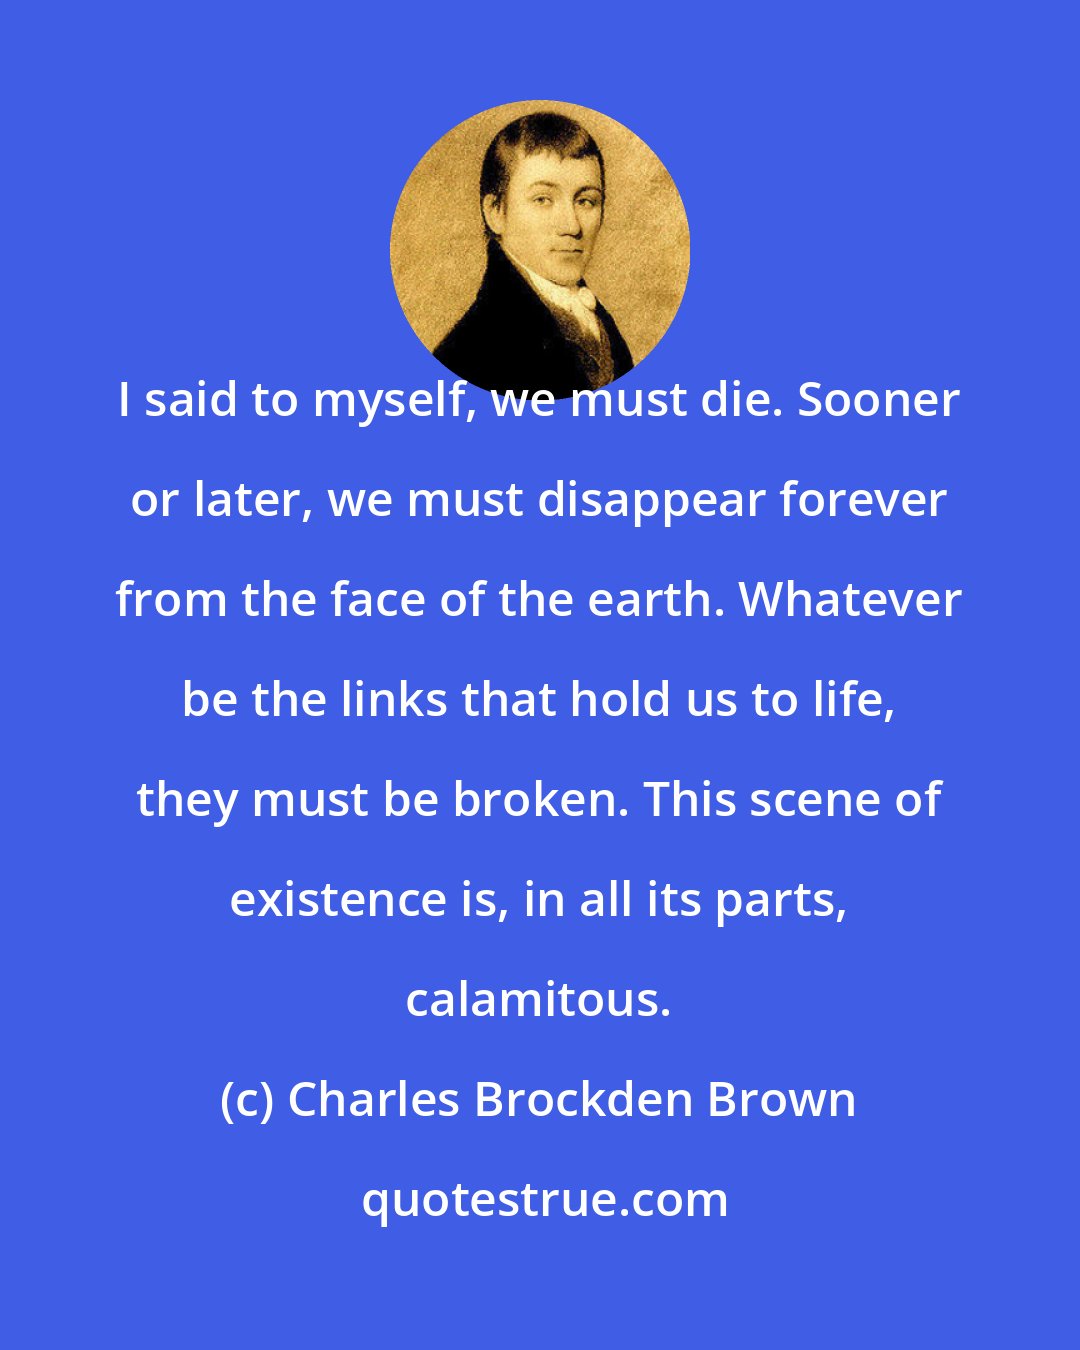 Charles Brockden Brown: I said to myself, we must die. Sooner or later, we must disappear forever from the face of the earth. Whatever be the links that hold us to life, they must be broken. This scene of existence is, in all its parts, calamitous.